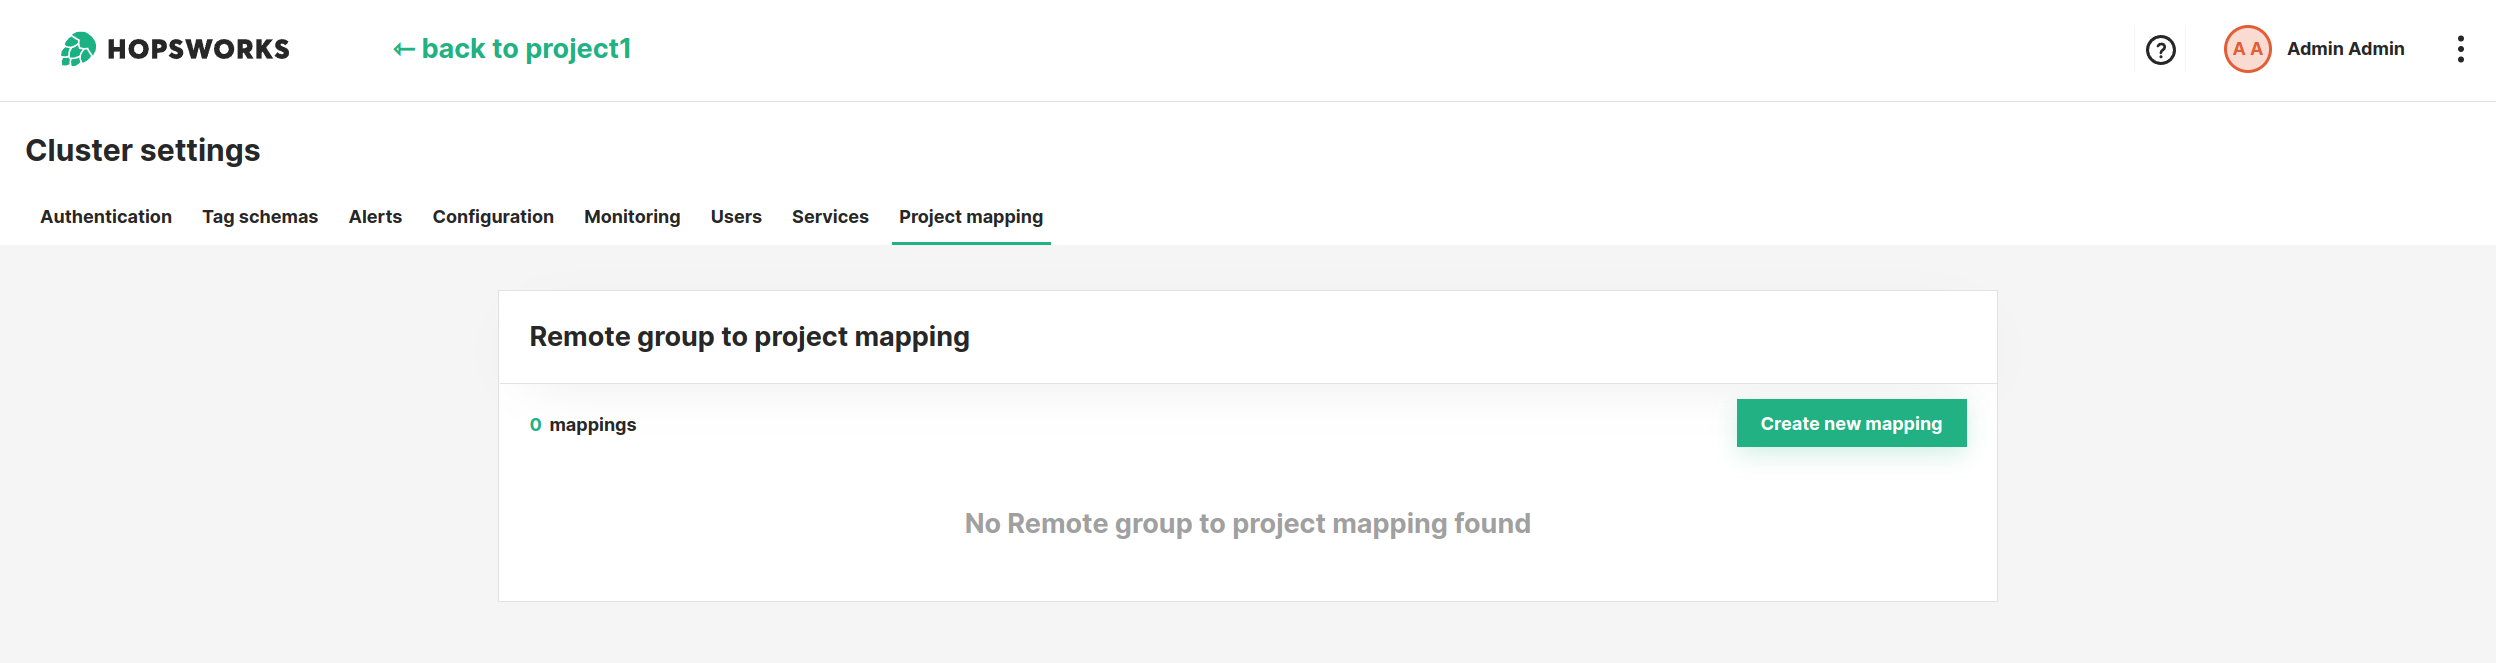 Project mapping tab